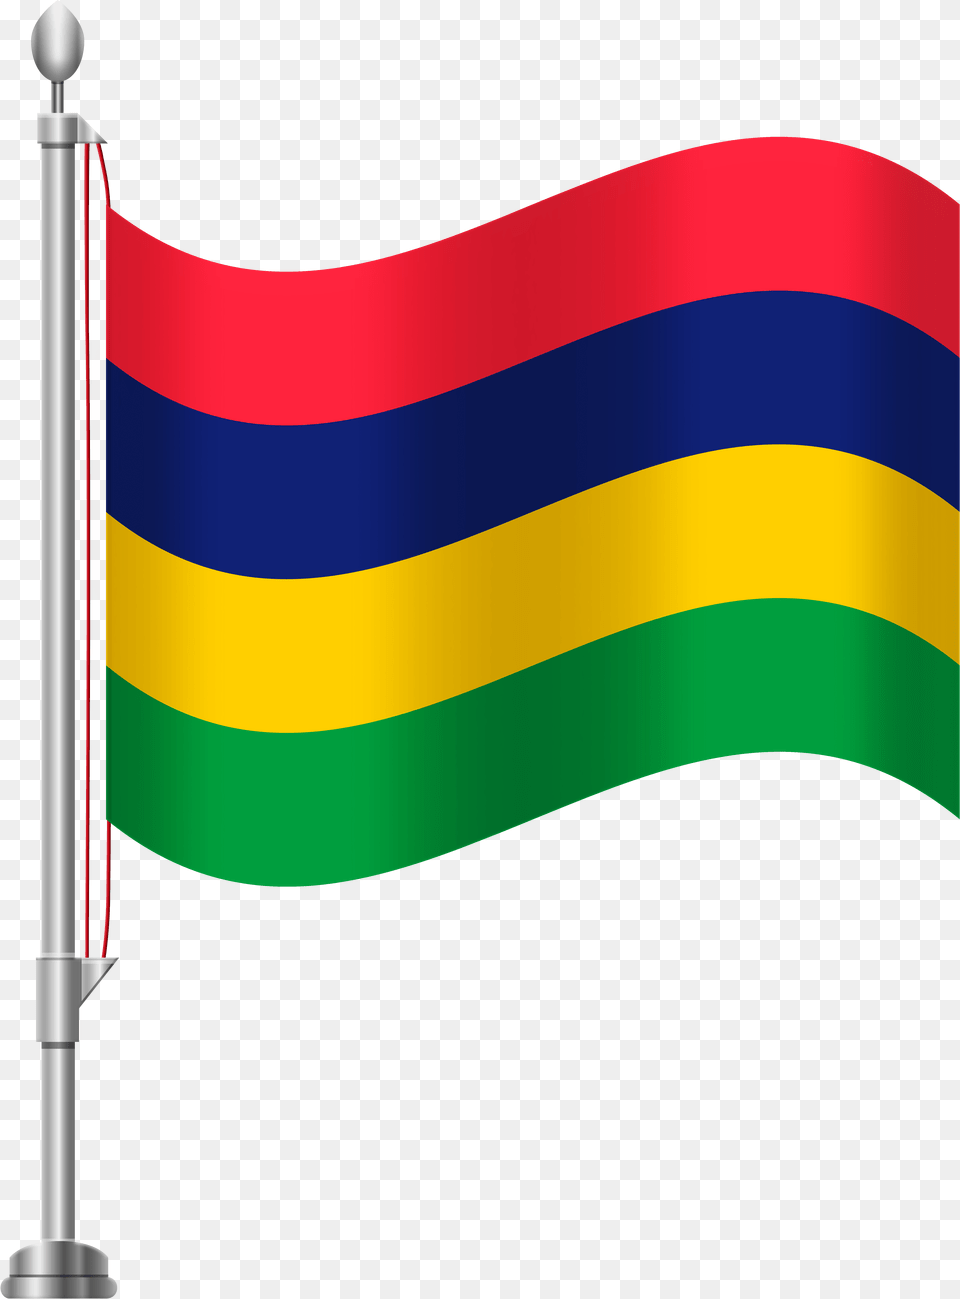 Download Water Emoji Image With No Background Mauritius Flag Free Png